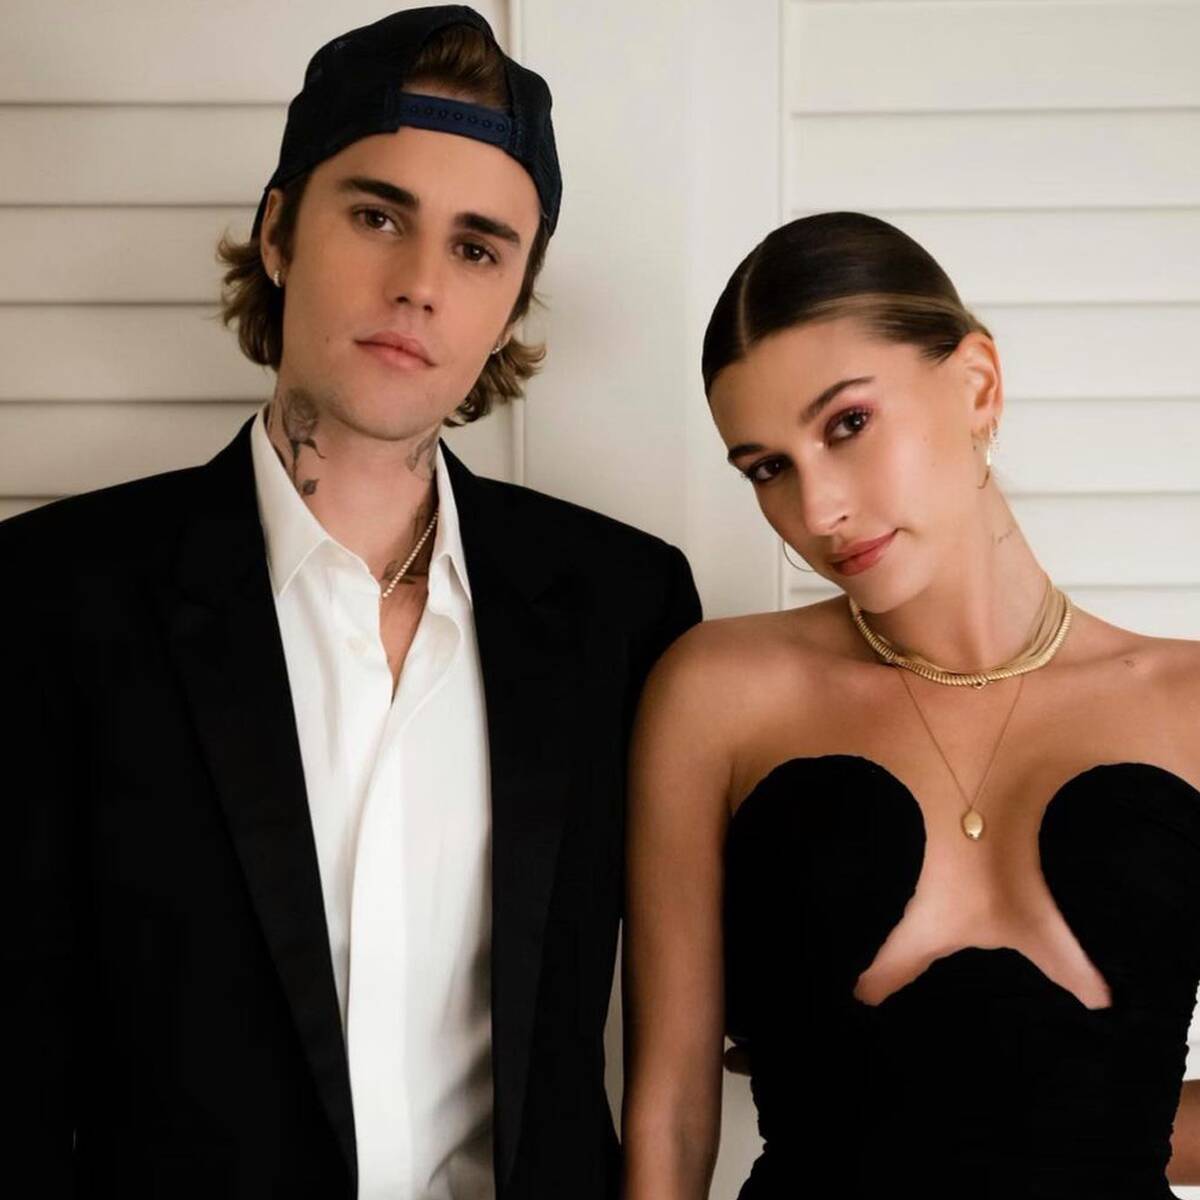 Hailey Bieber Is Justin’s Muse in Intimate Music Video for “Anyone”